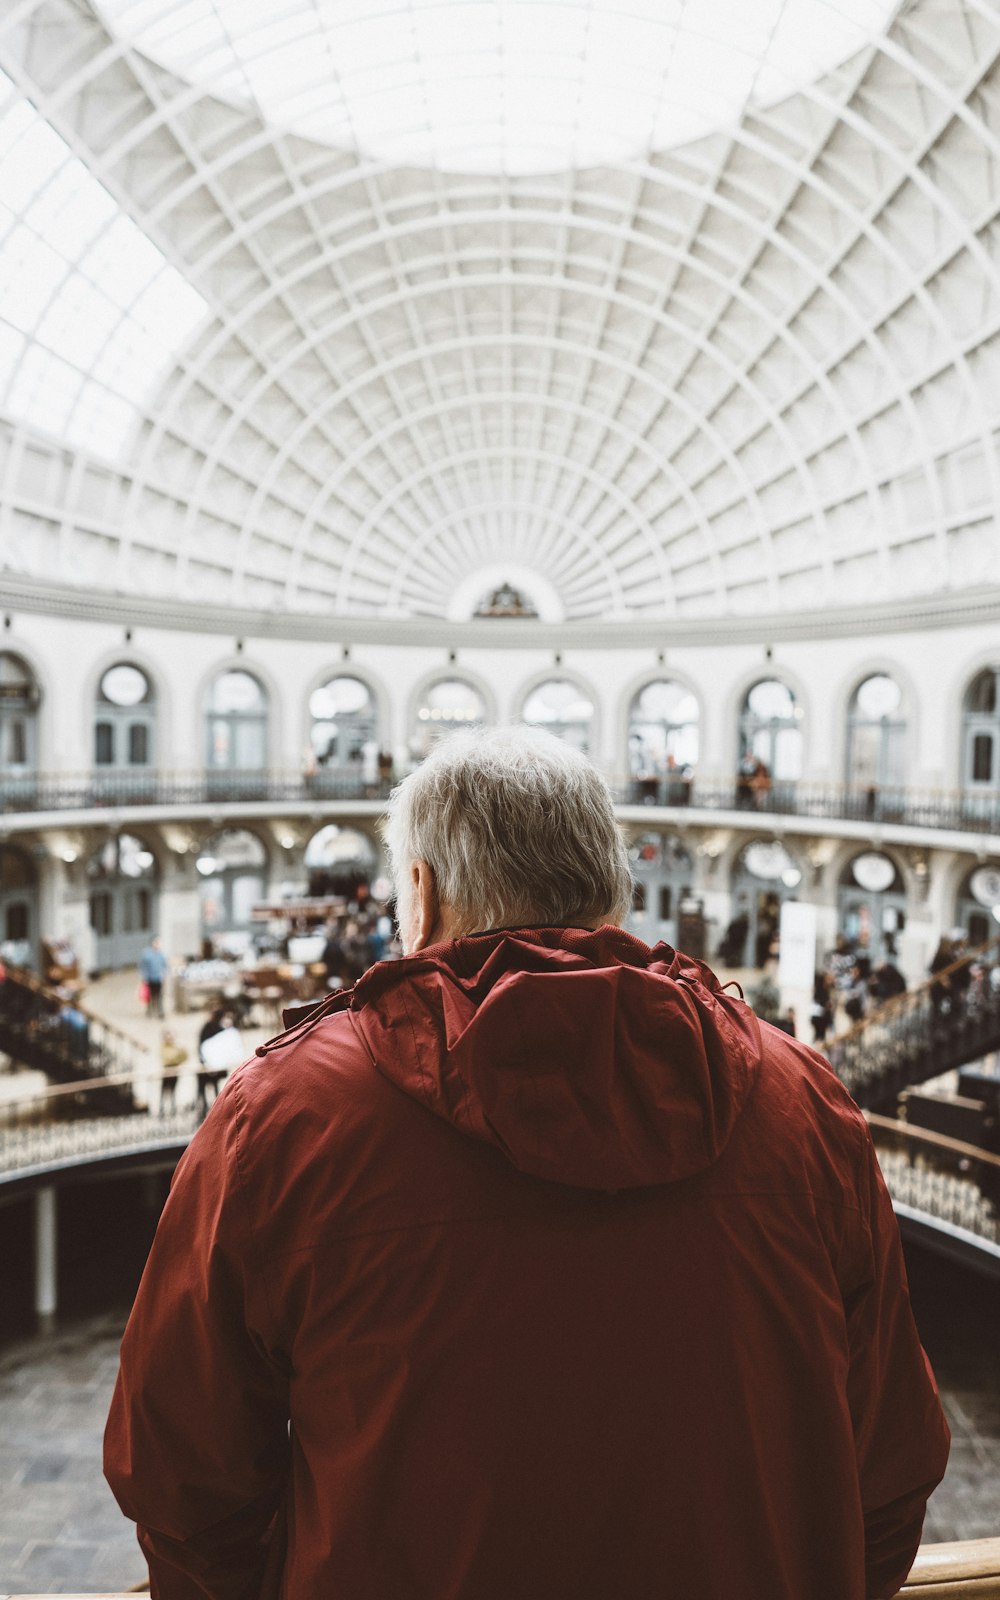 man wearing red hoodie inside dome building in front of people